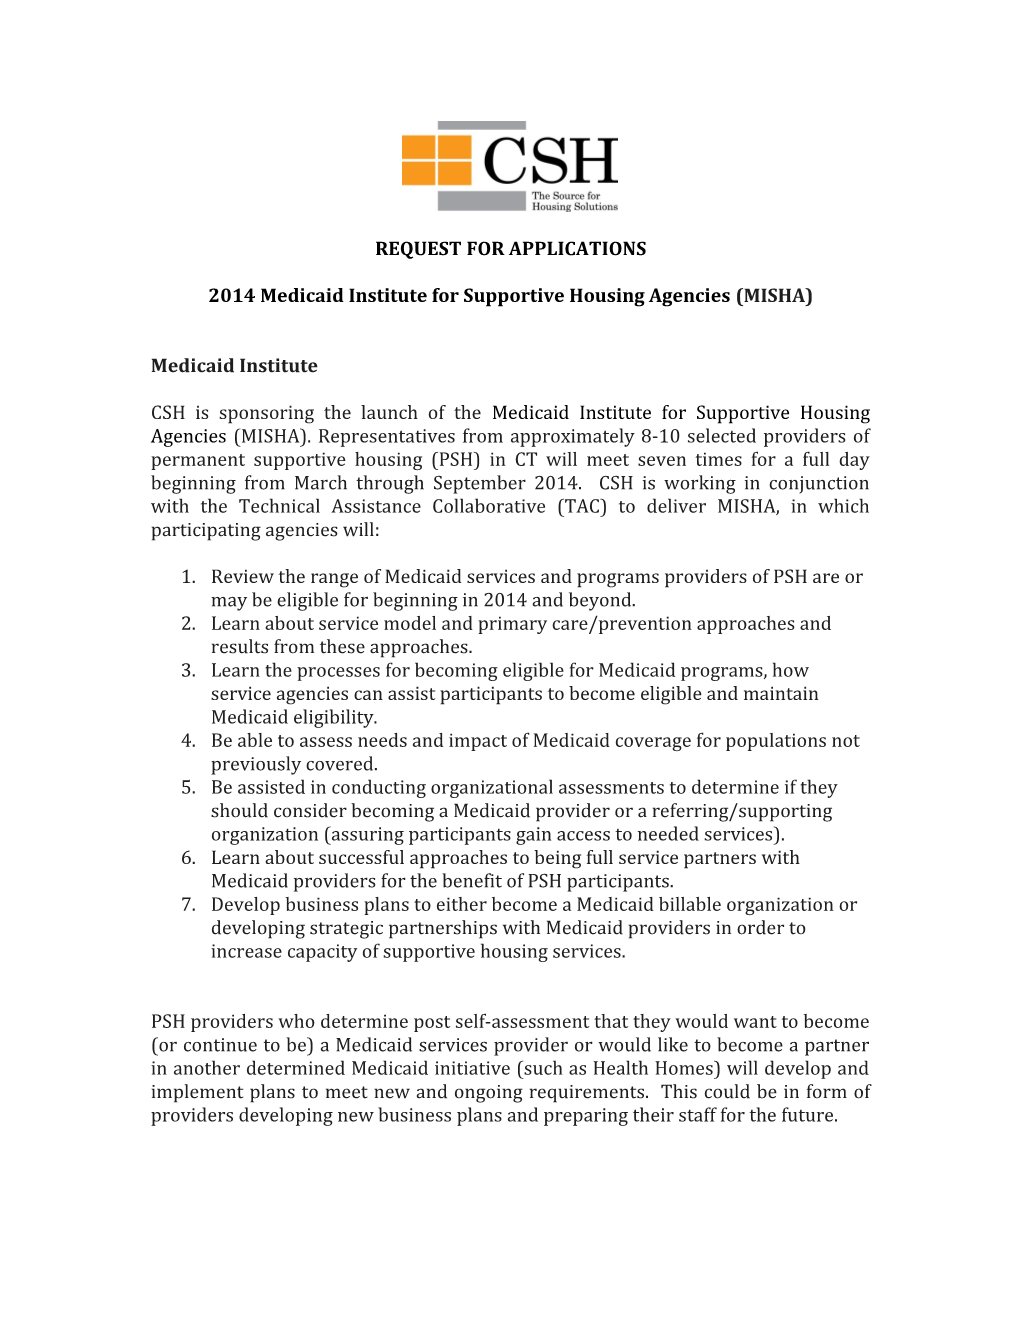 2014 Medicaid Institute for Supportive Housing Agencies (MISHA)